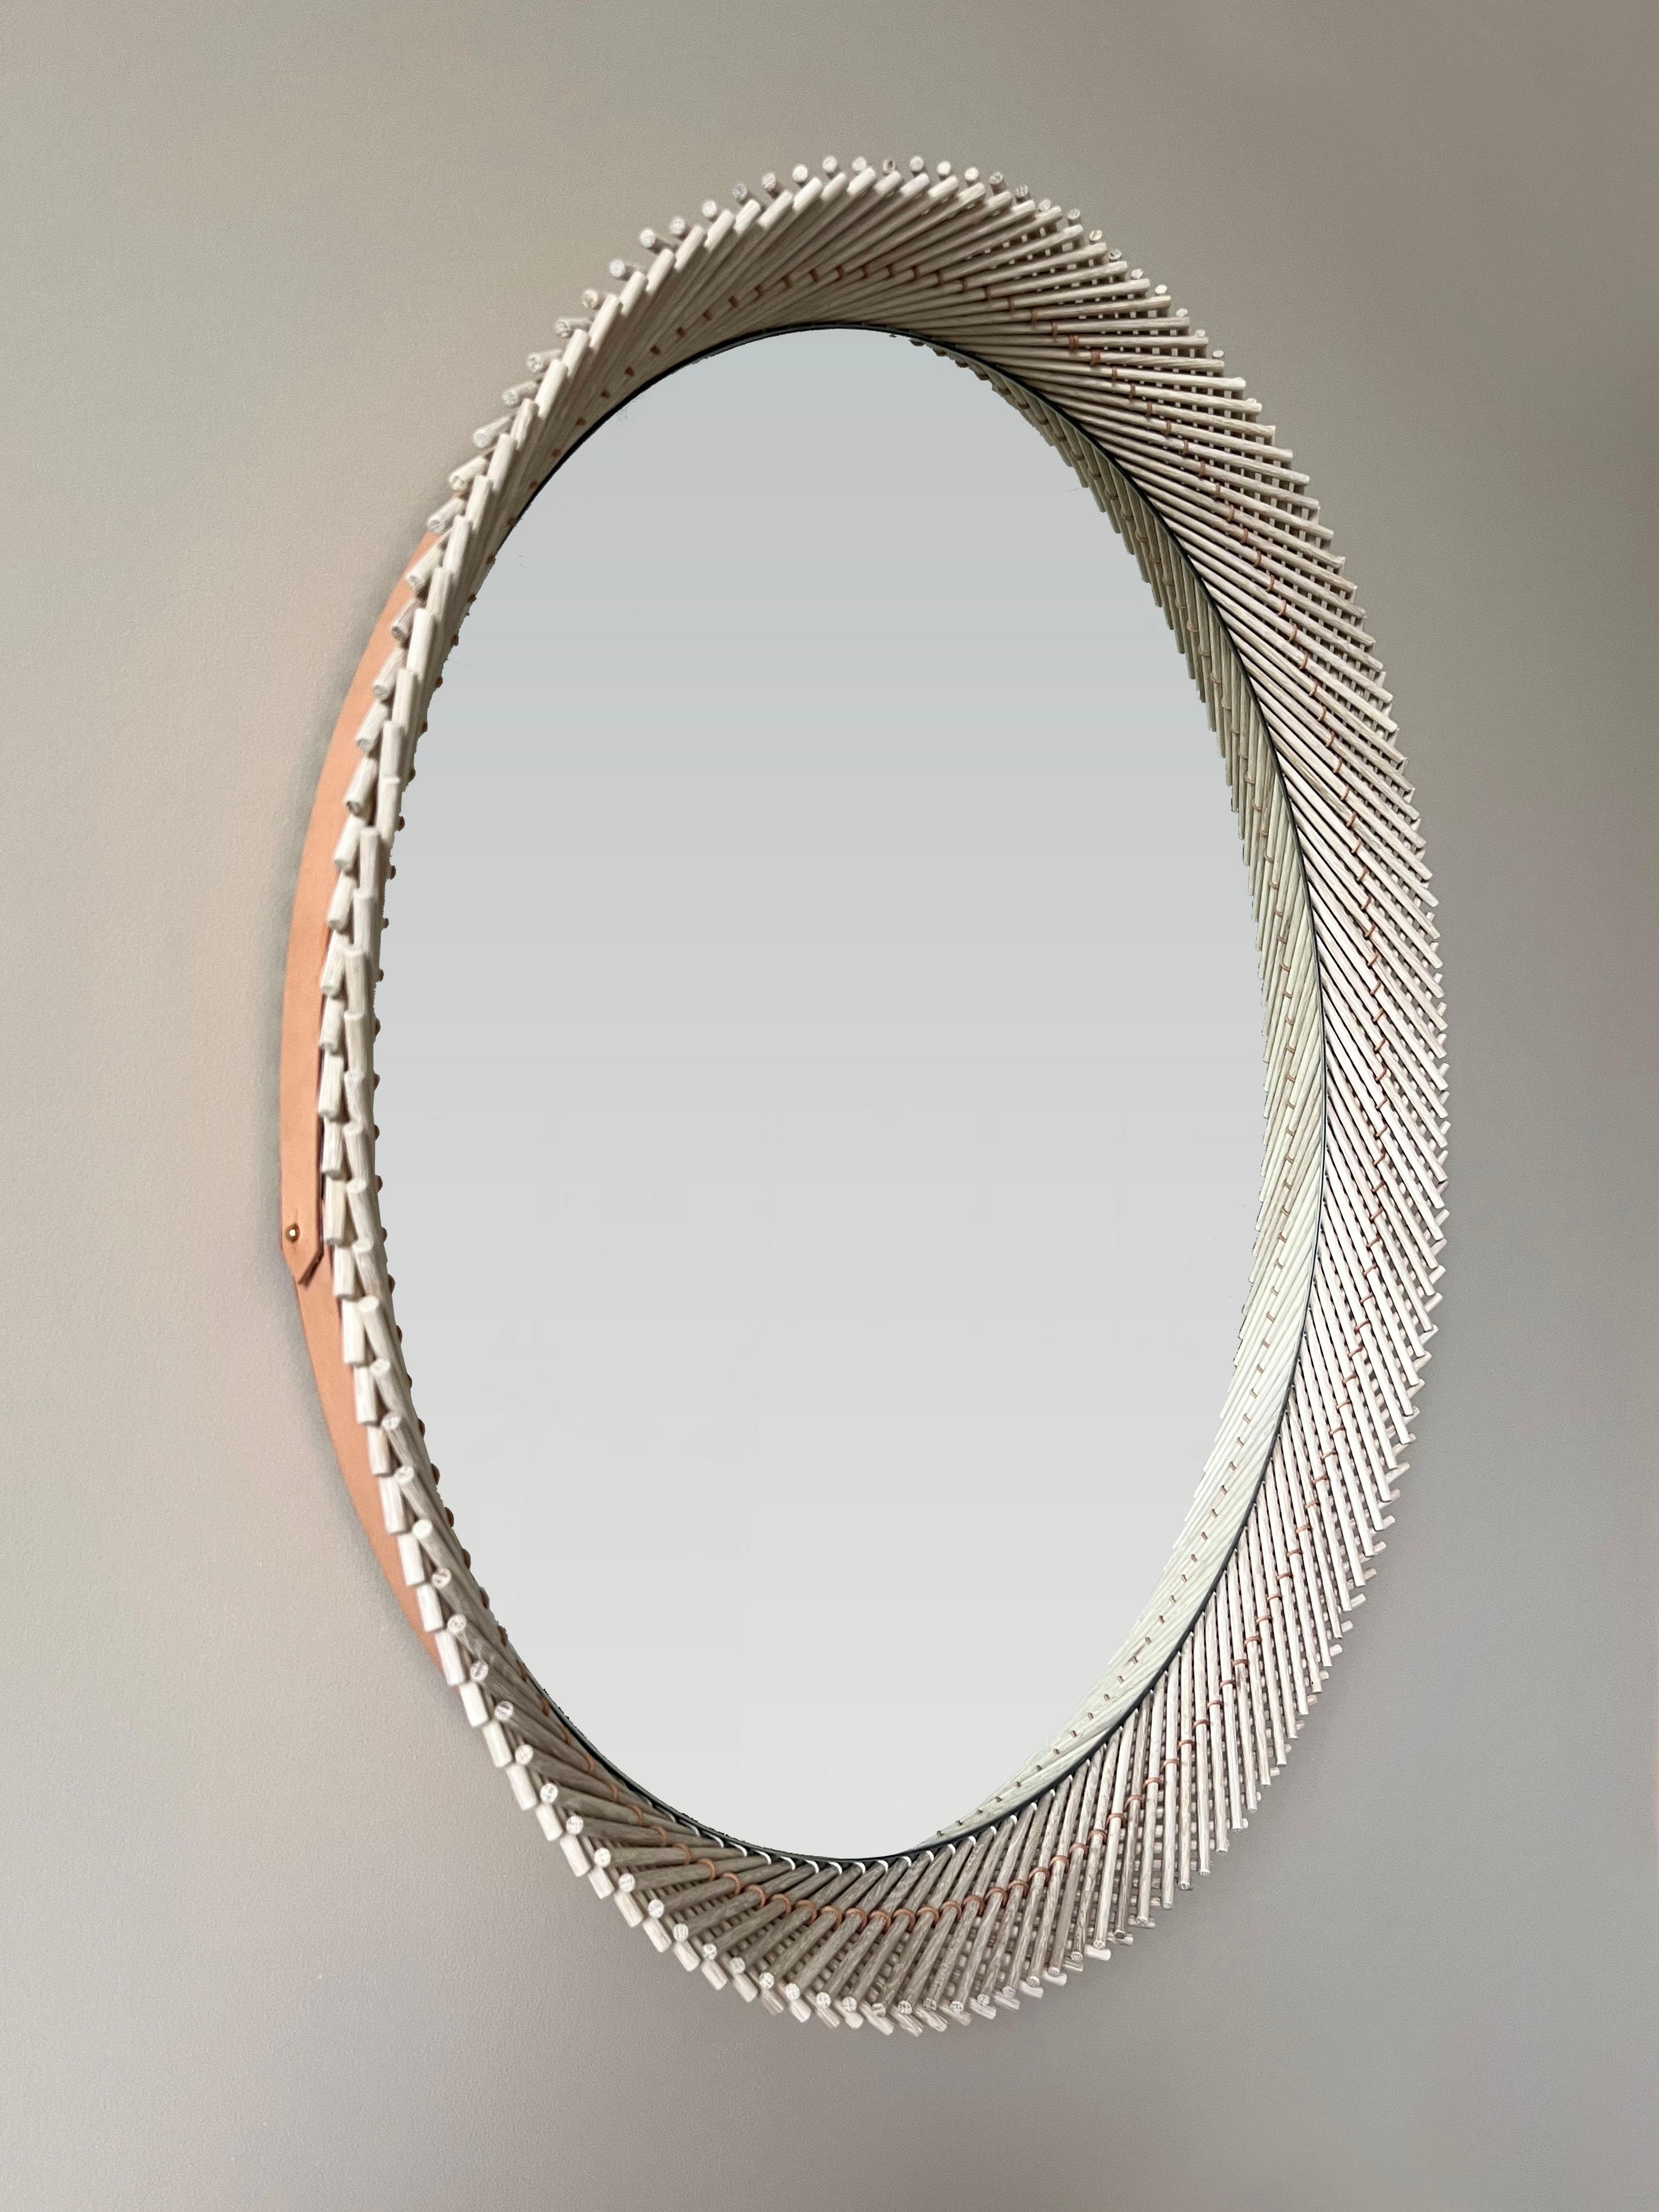 The Mooda Mirror is composed of a set of dowels stitched together to create a beautiful geometric edge around the glass. The mirror in turn reflects the dowels along its circumference, completing the traditional form of the Mooda. 

Available in two